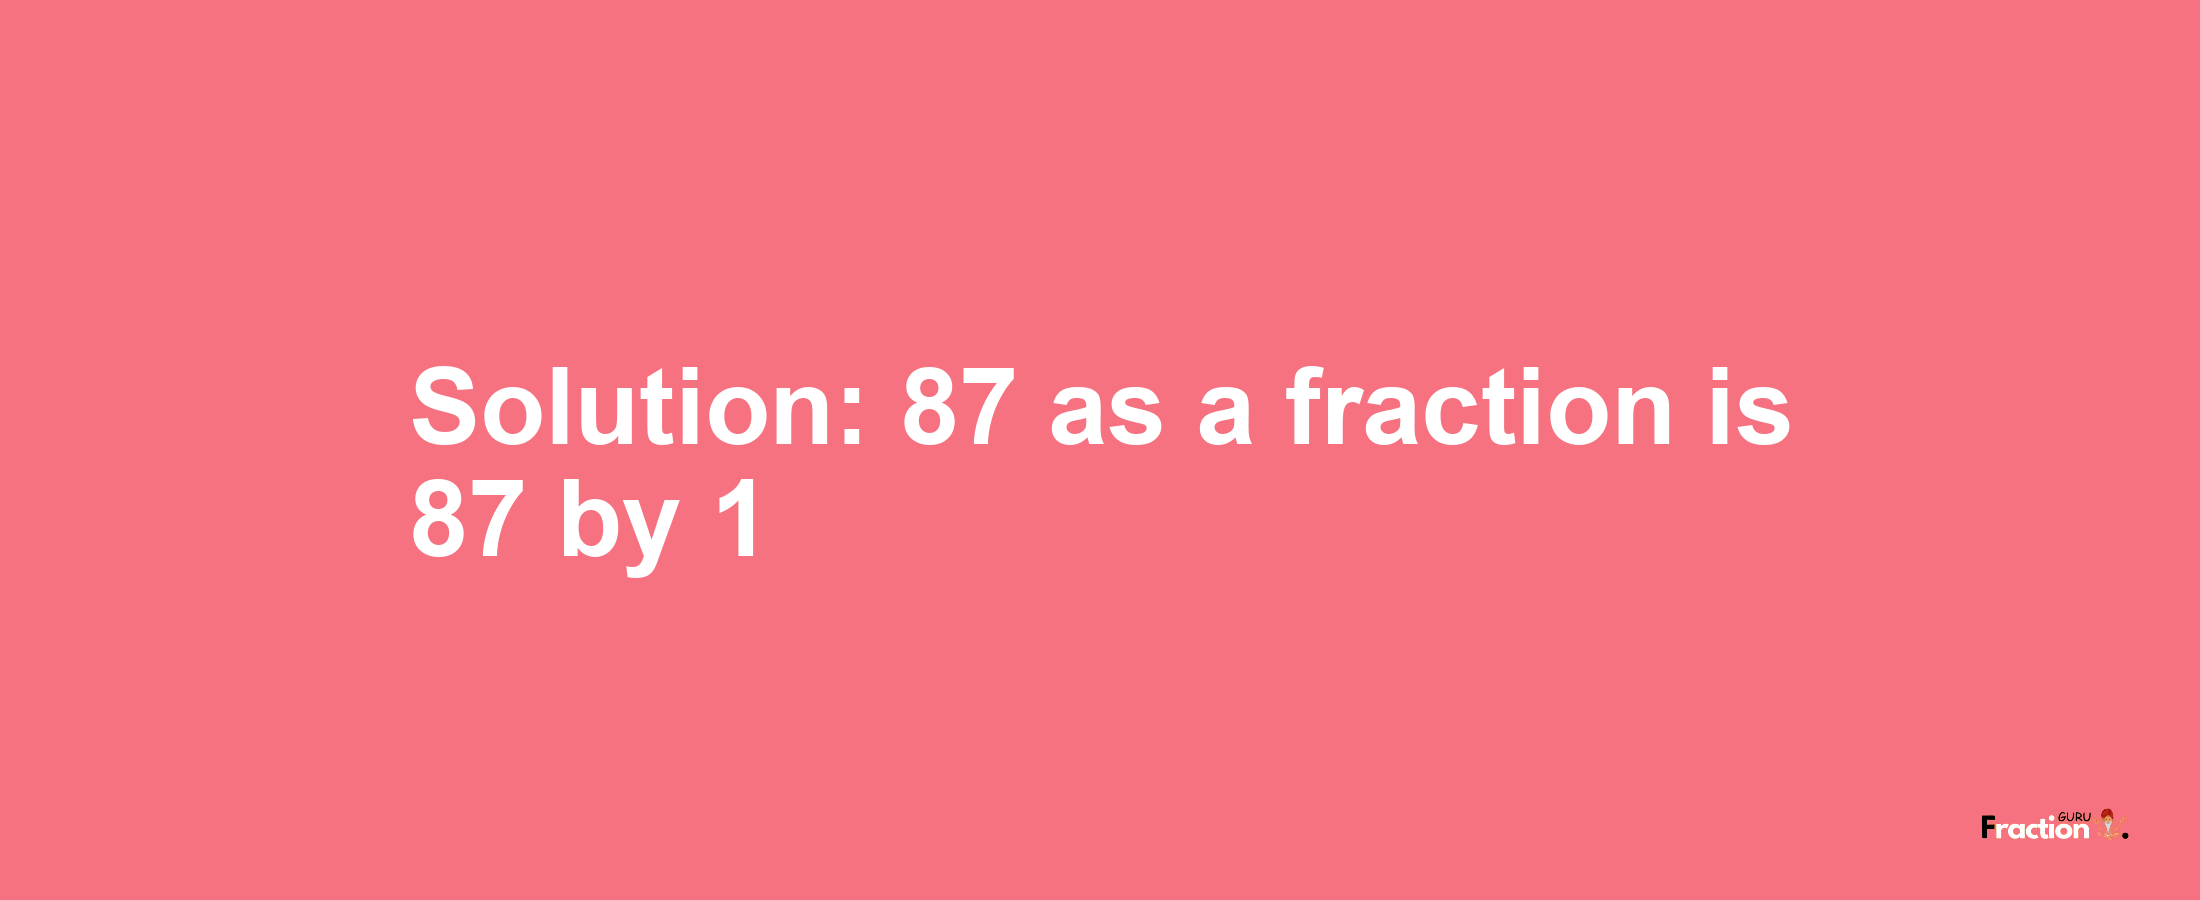 Solution:87 as a fraction is 87/1